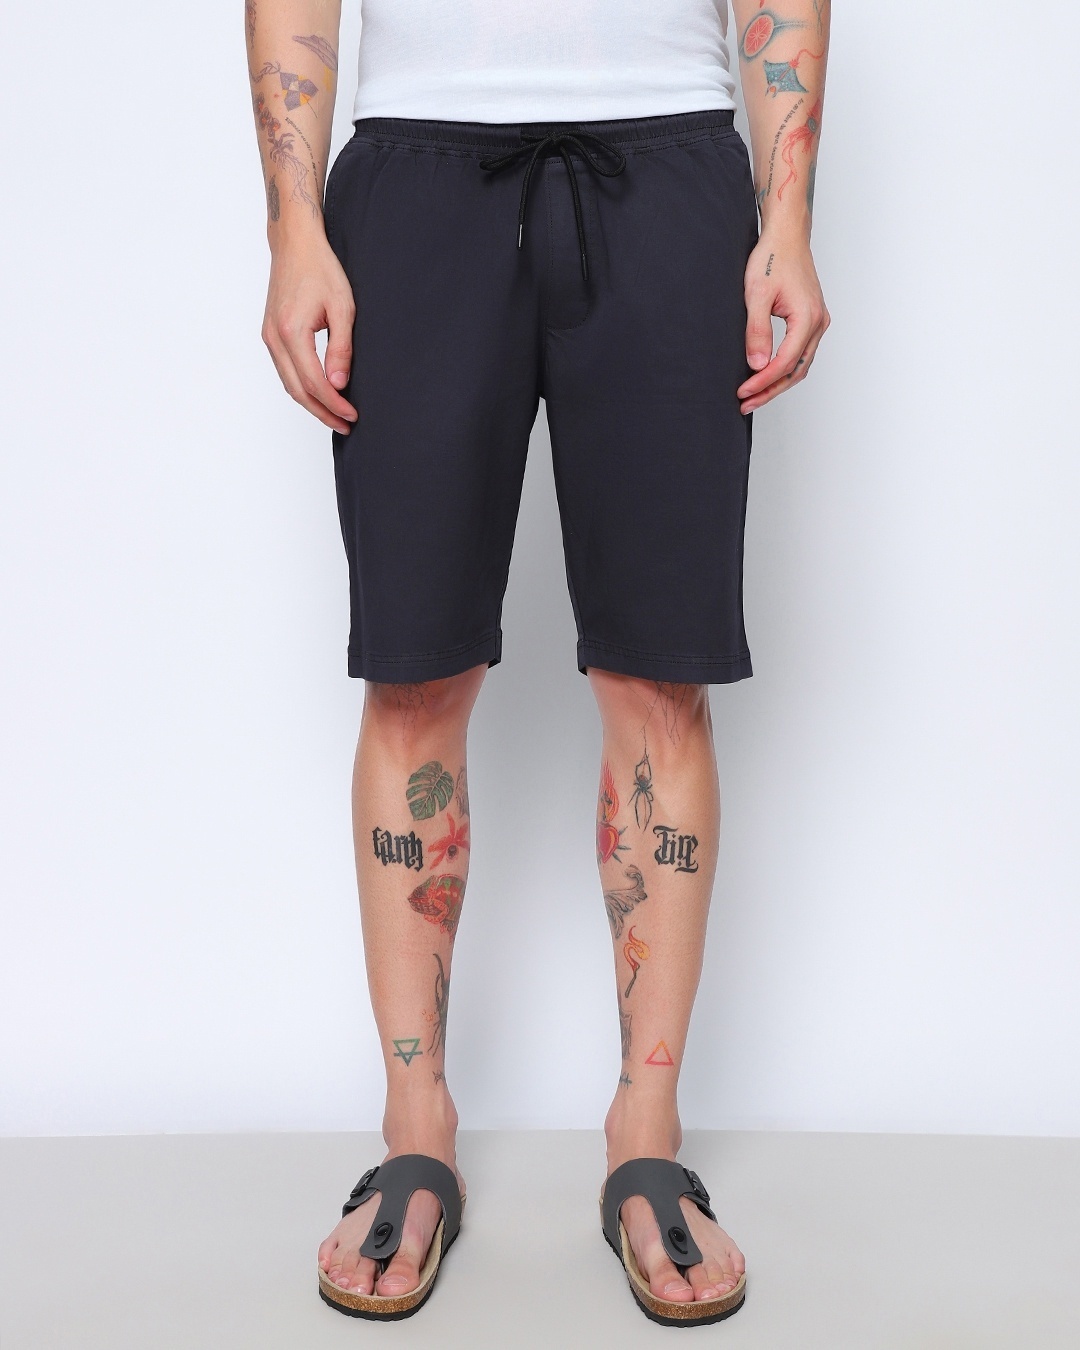 Men's Black Over Dyed Shorts paired with black shirt